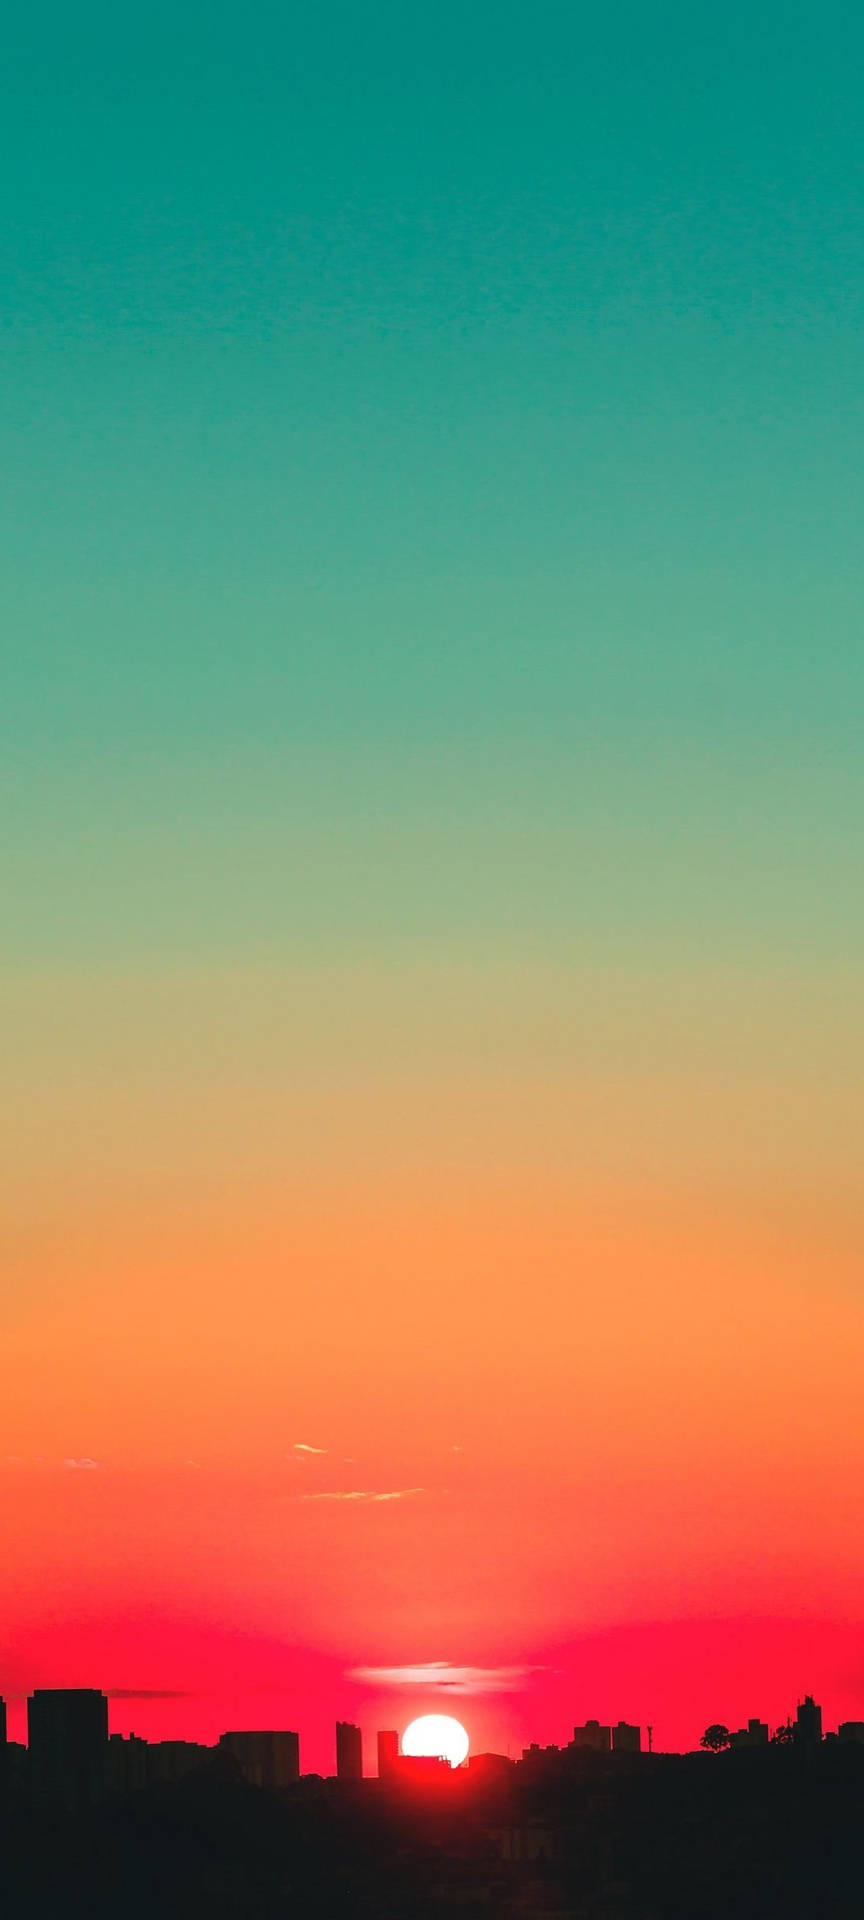 Teal And Red Sunset Sky Background